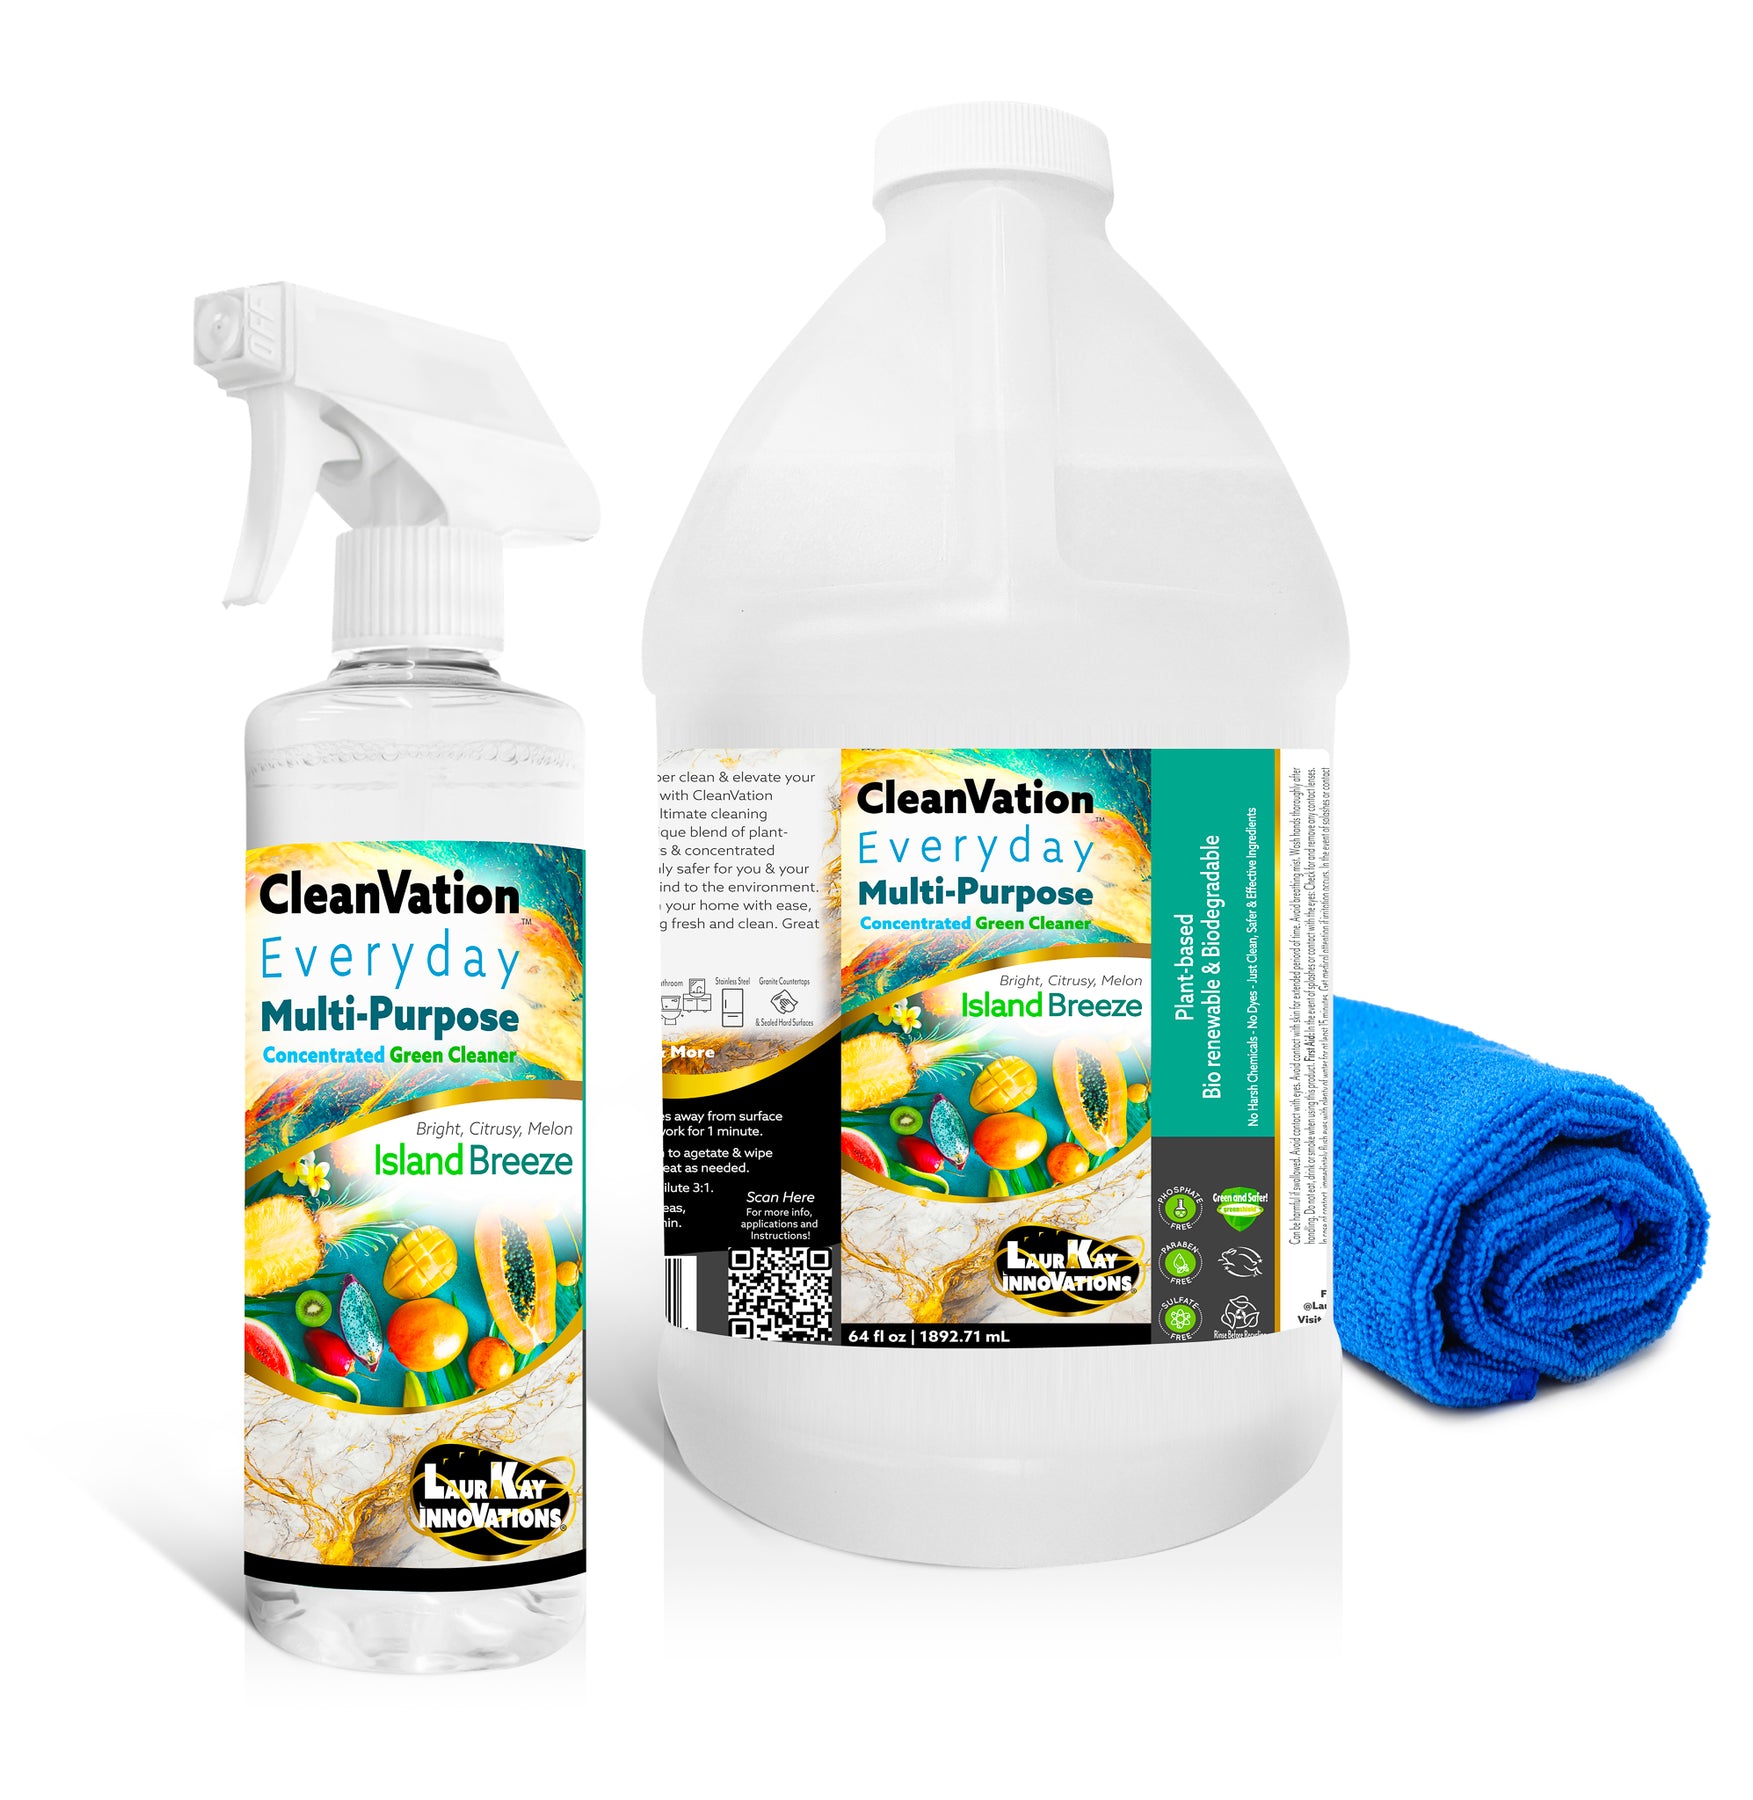 Cleaners Bundle